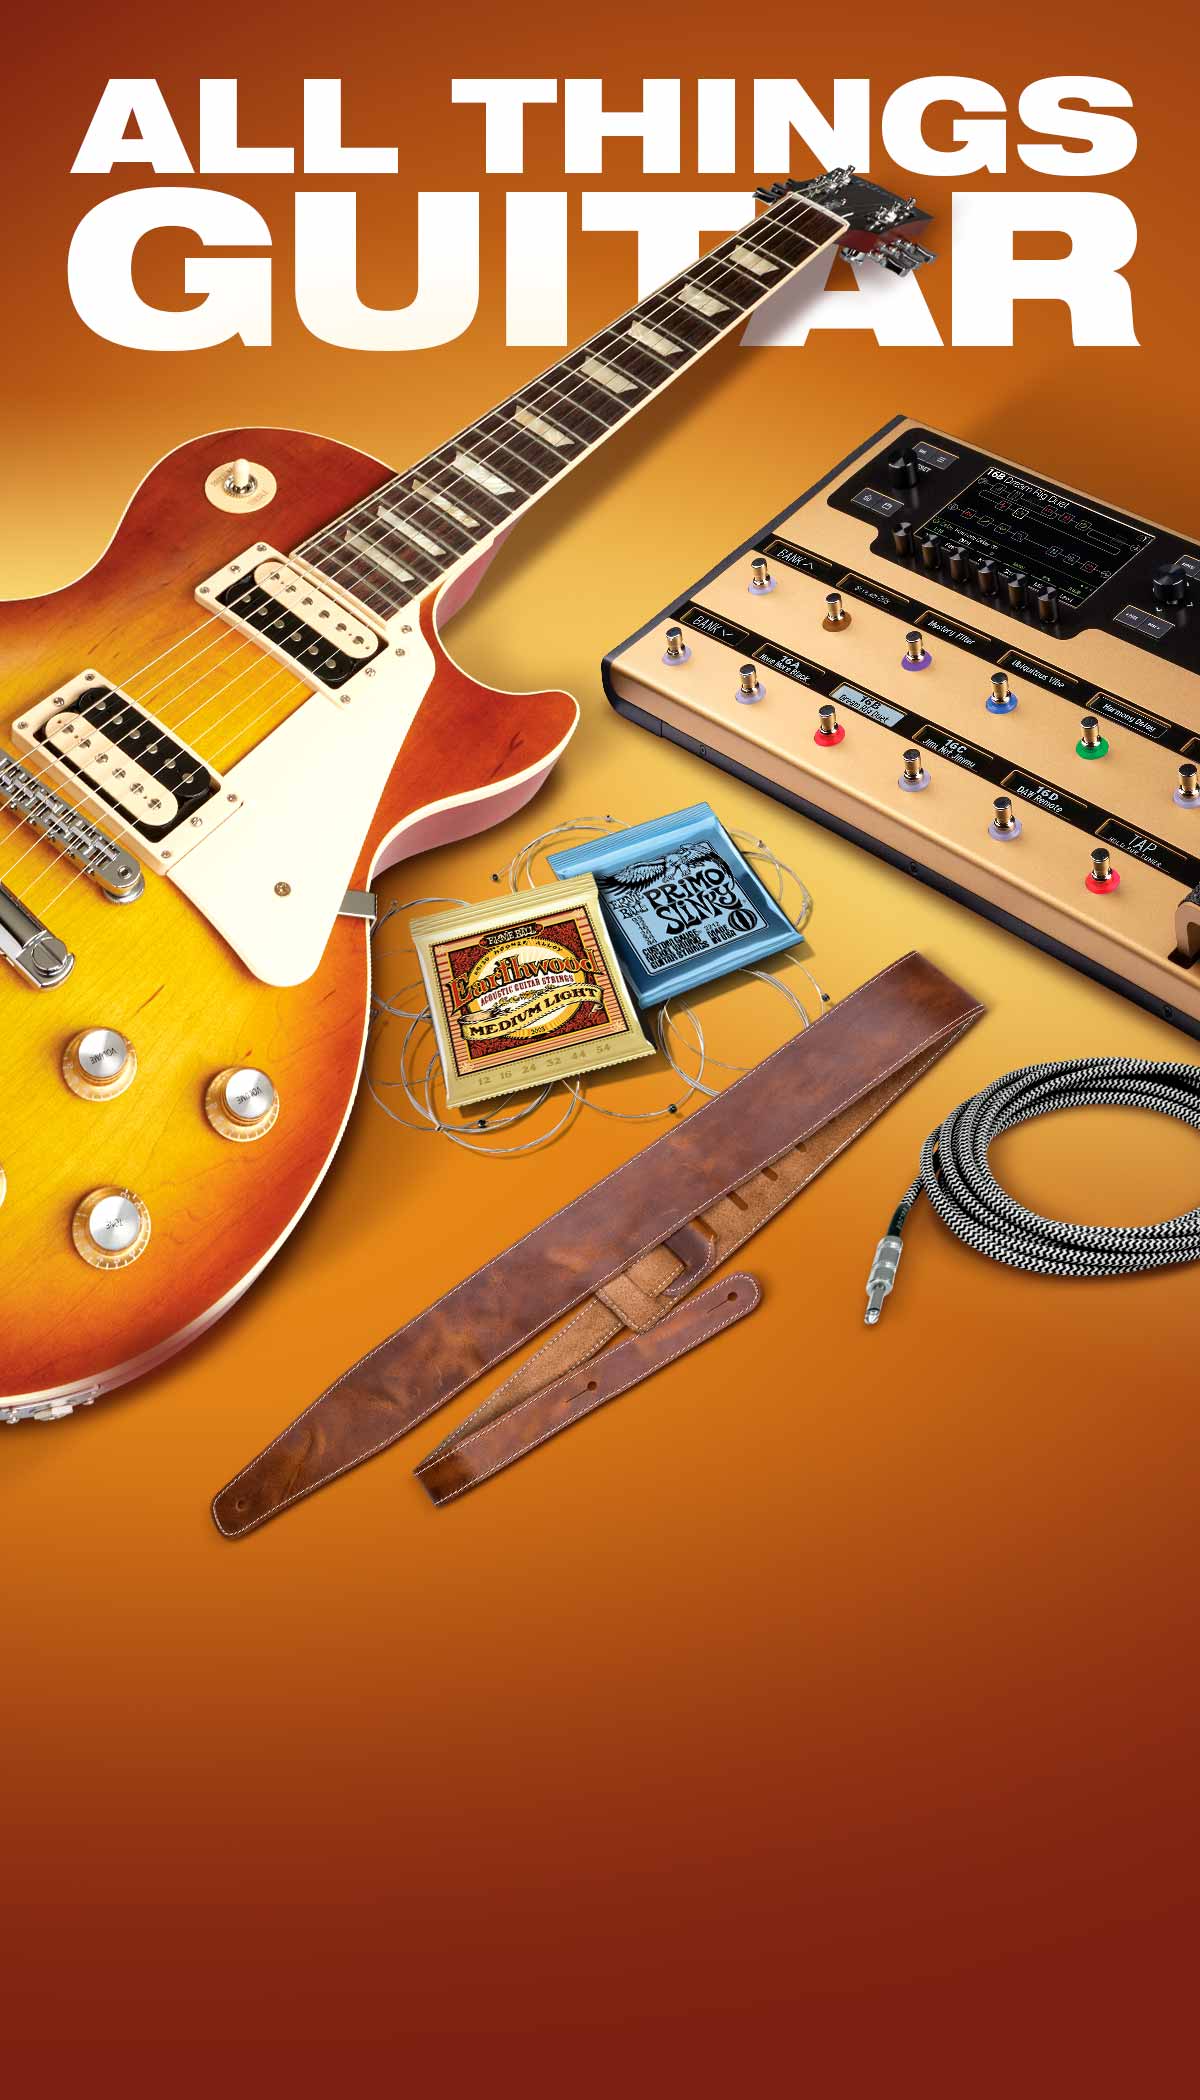 All Things Guitar. Limited-time deals. The hottest new gear.